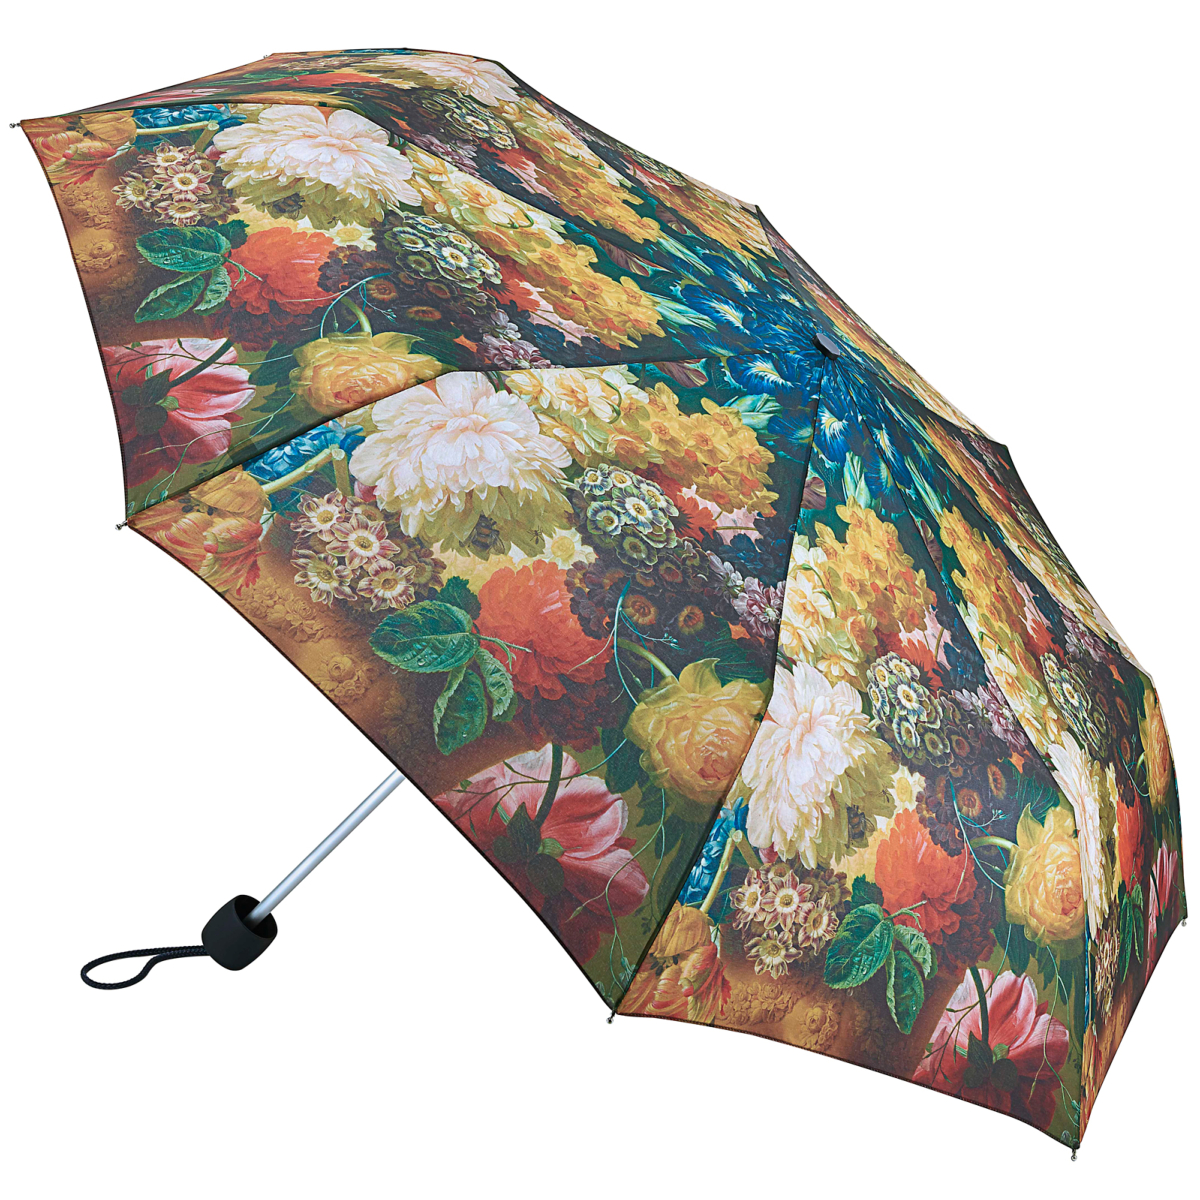 The National Gallery Minilite Folding Umbrella - Flowers in a Vase by Van Brussel